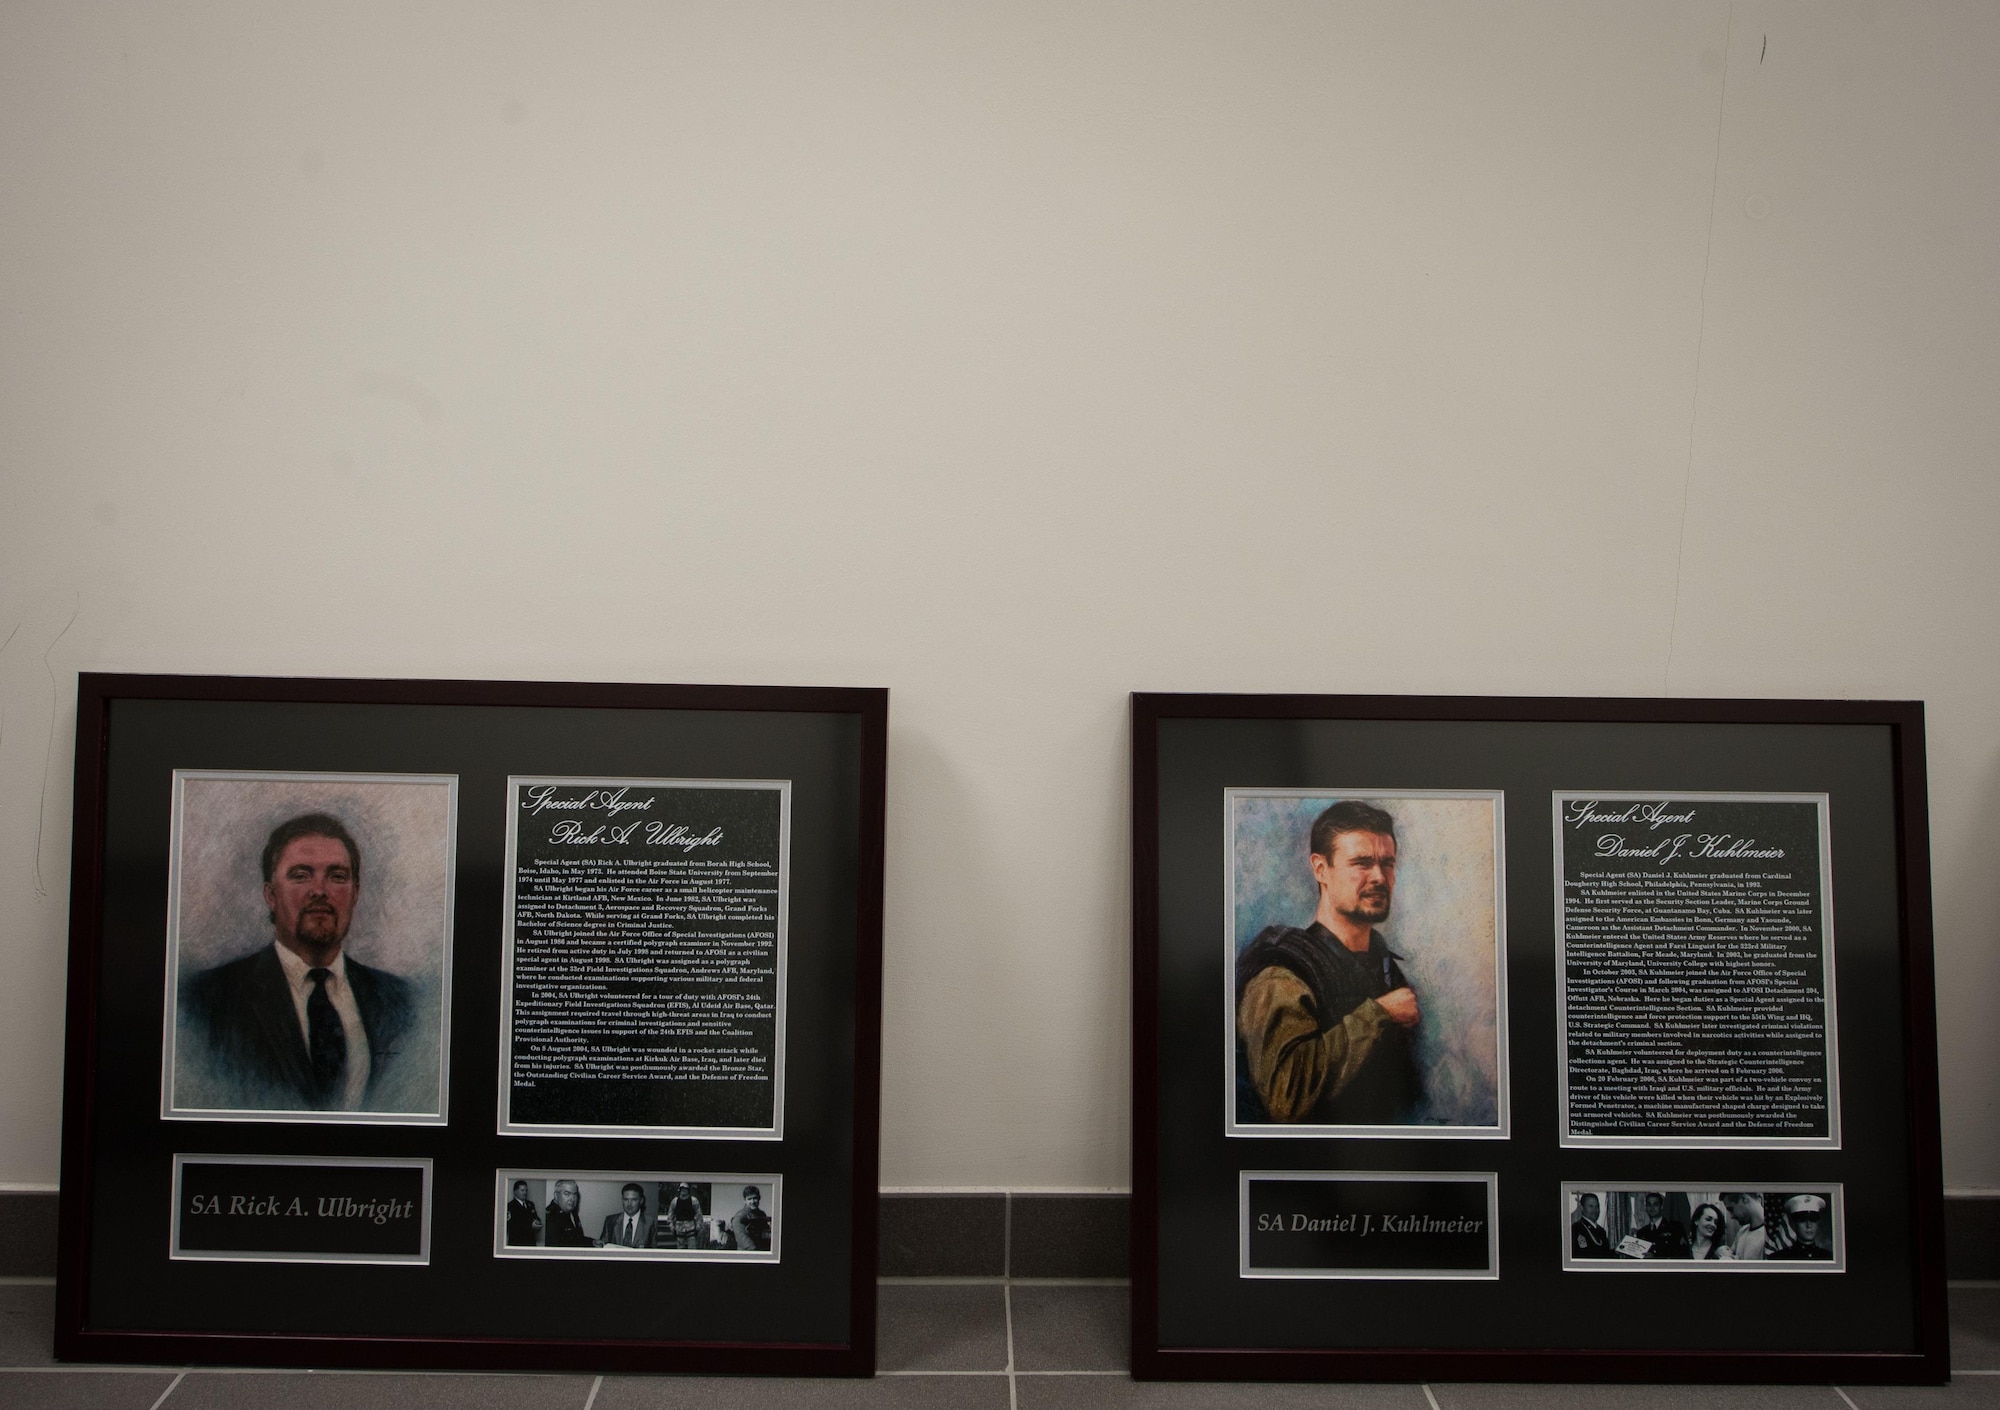 Two portraits of fallen Air Force Office of Special Investigations Airmen lay on the floor during the 25th Expeditionary Field Investigation Squadron’s fallen heroes dedication ceremony at Ramstein Air Base, Germany, Nov. 10, 2016. The 25th EFIS held the ceremony to commemorate AFOSI agents who lost their lives in the line of duty. Veteran’s Day is a celebration to honor America's veterans for their patriotism, love of country, and willingness to serve and sacrifice, even if it means their lives. According to a recent Congressional Research Service report, more than 6,500 U.S. service members have lost their lives in post-9/11 conflicts in Iraq and Afghanistan. (U.S. Air Force photo by Airman 1st Class Lane T. Plummer)